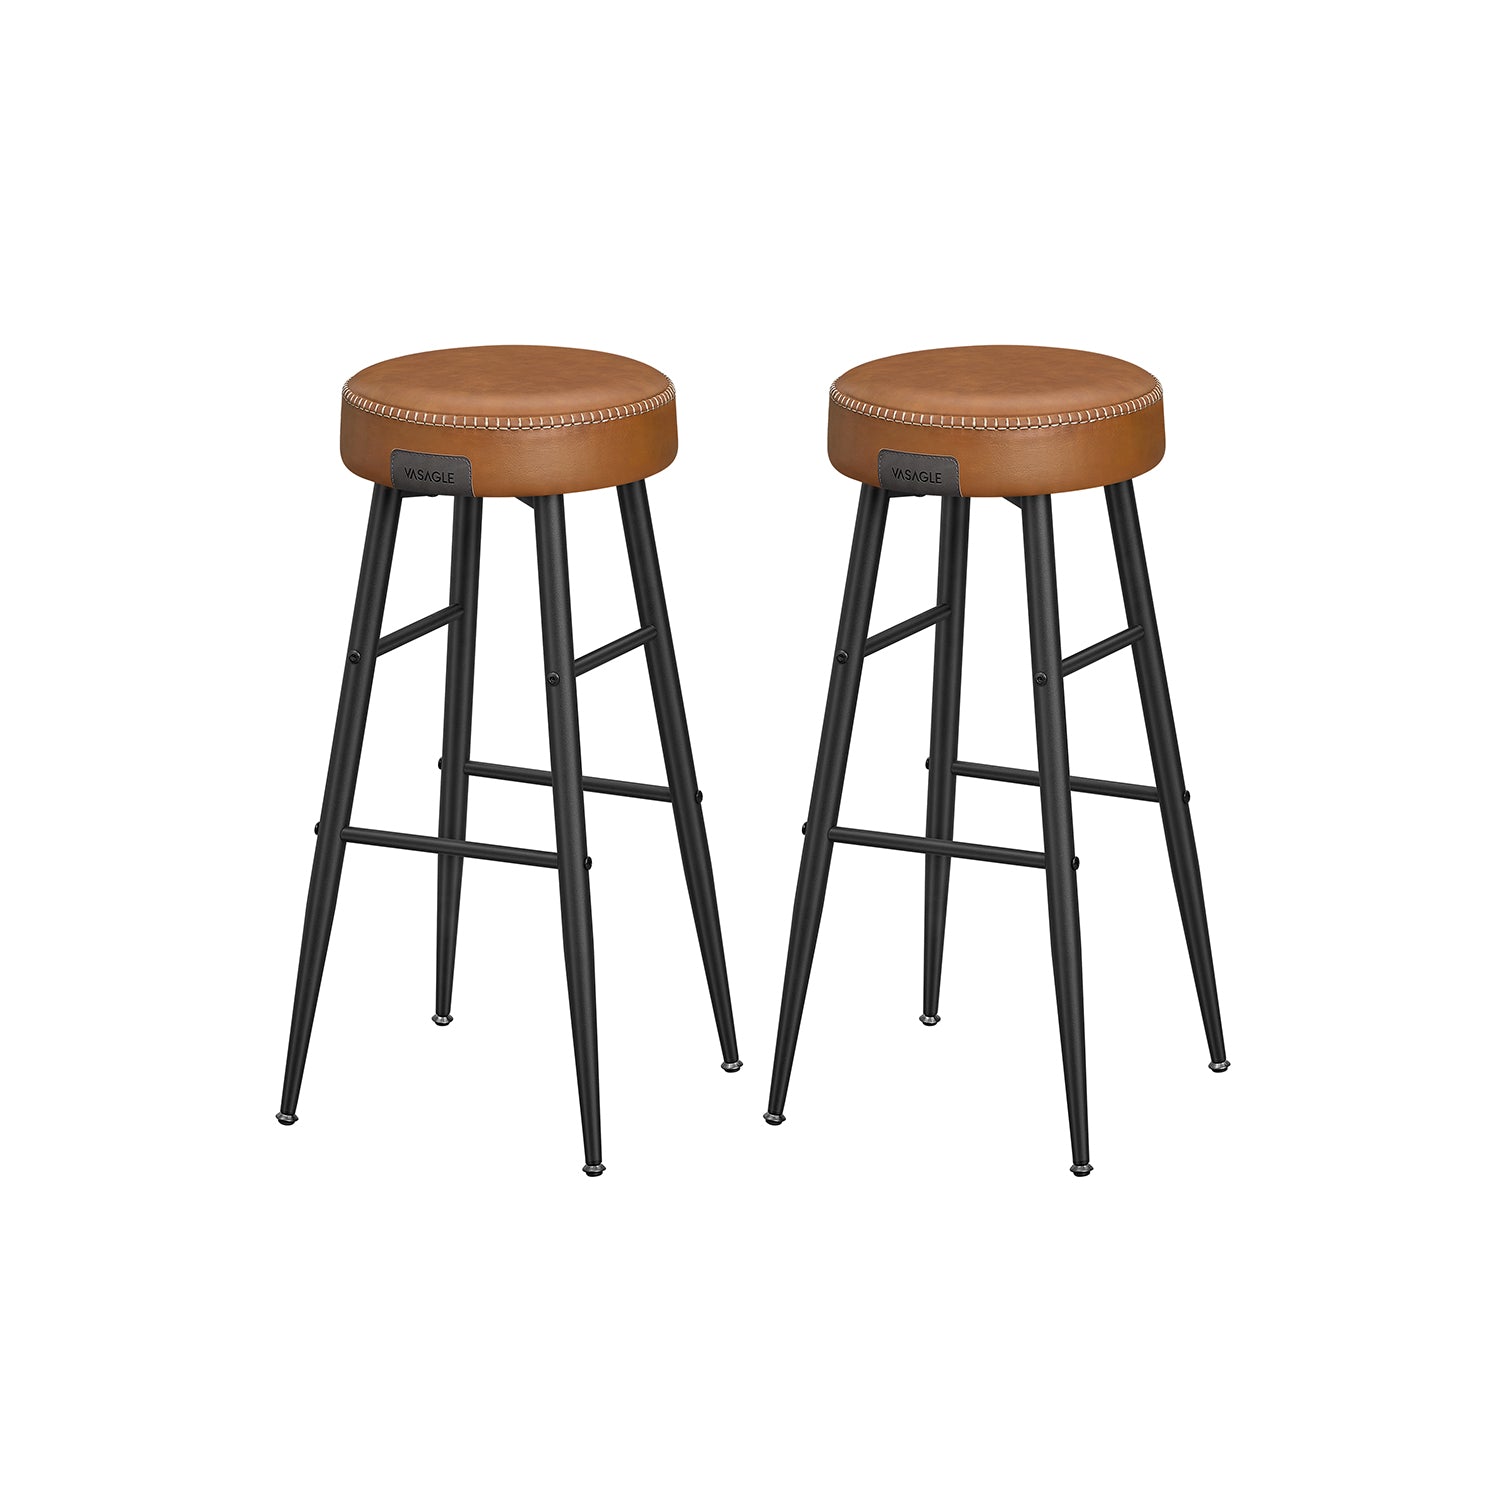 VASAGLE EKHO Collection - Bar Stools Set of 2, Kitchen Counter Stools,  Breakfast Stools, Synthetic Leather with Stitching, 24.8-Inch Tall, Home  Bar